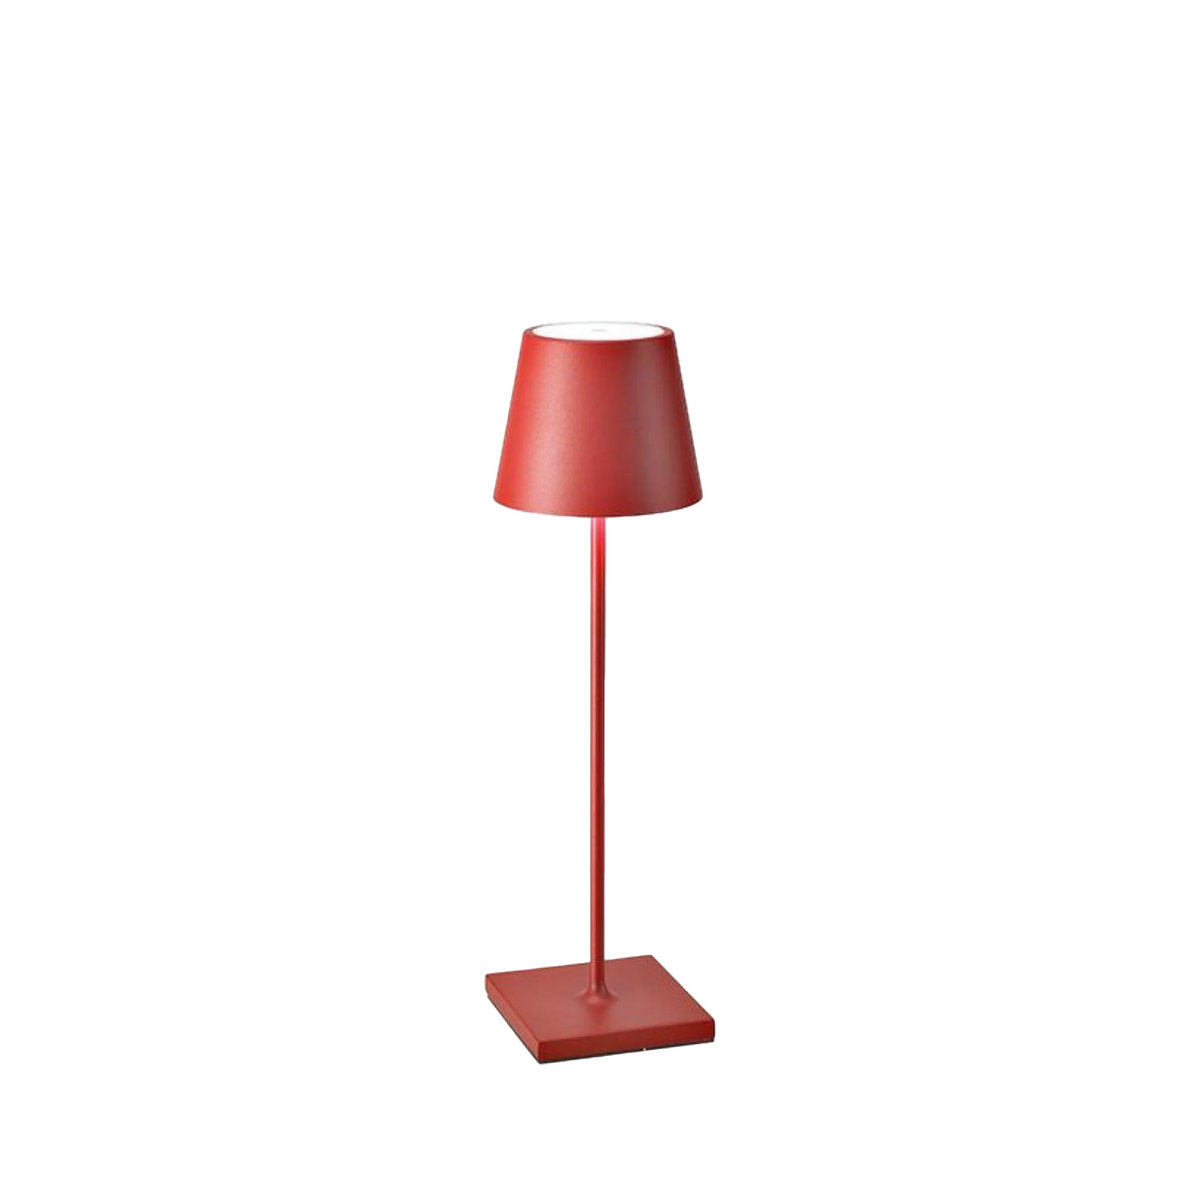 Poldina Pro Lamp in Red